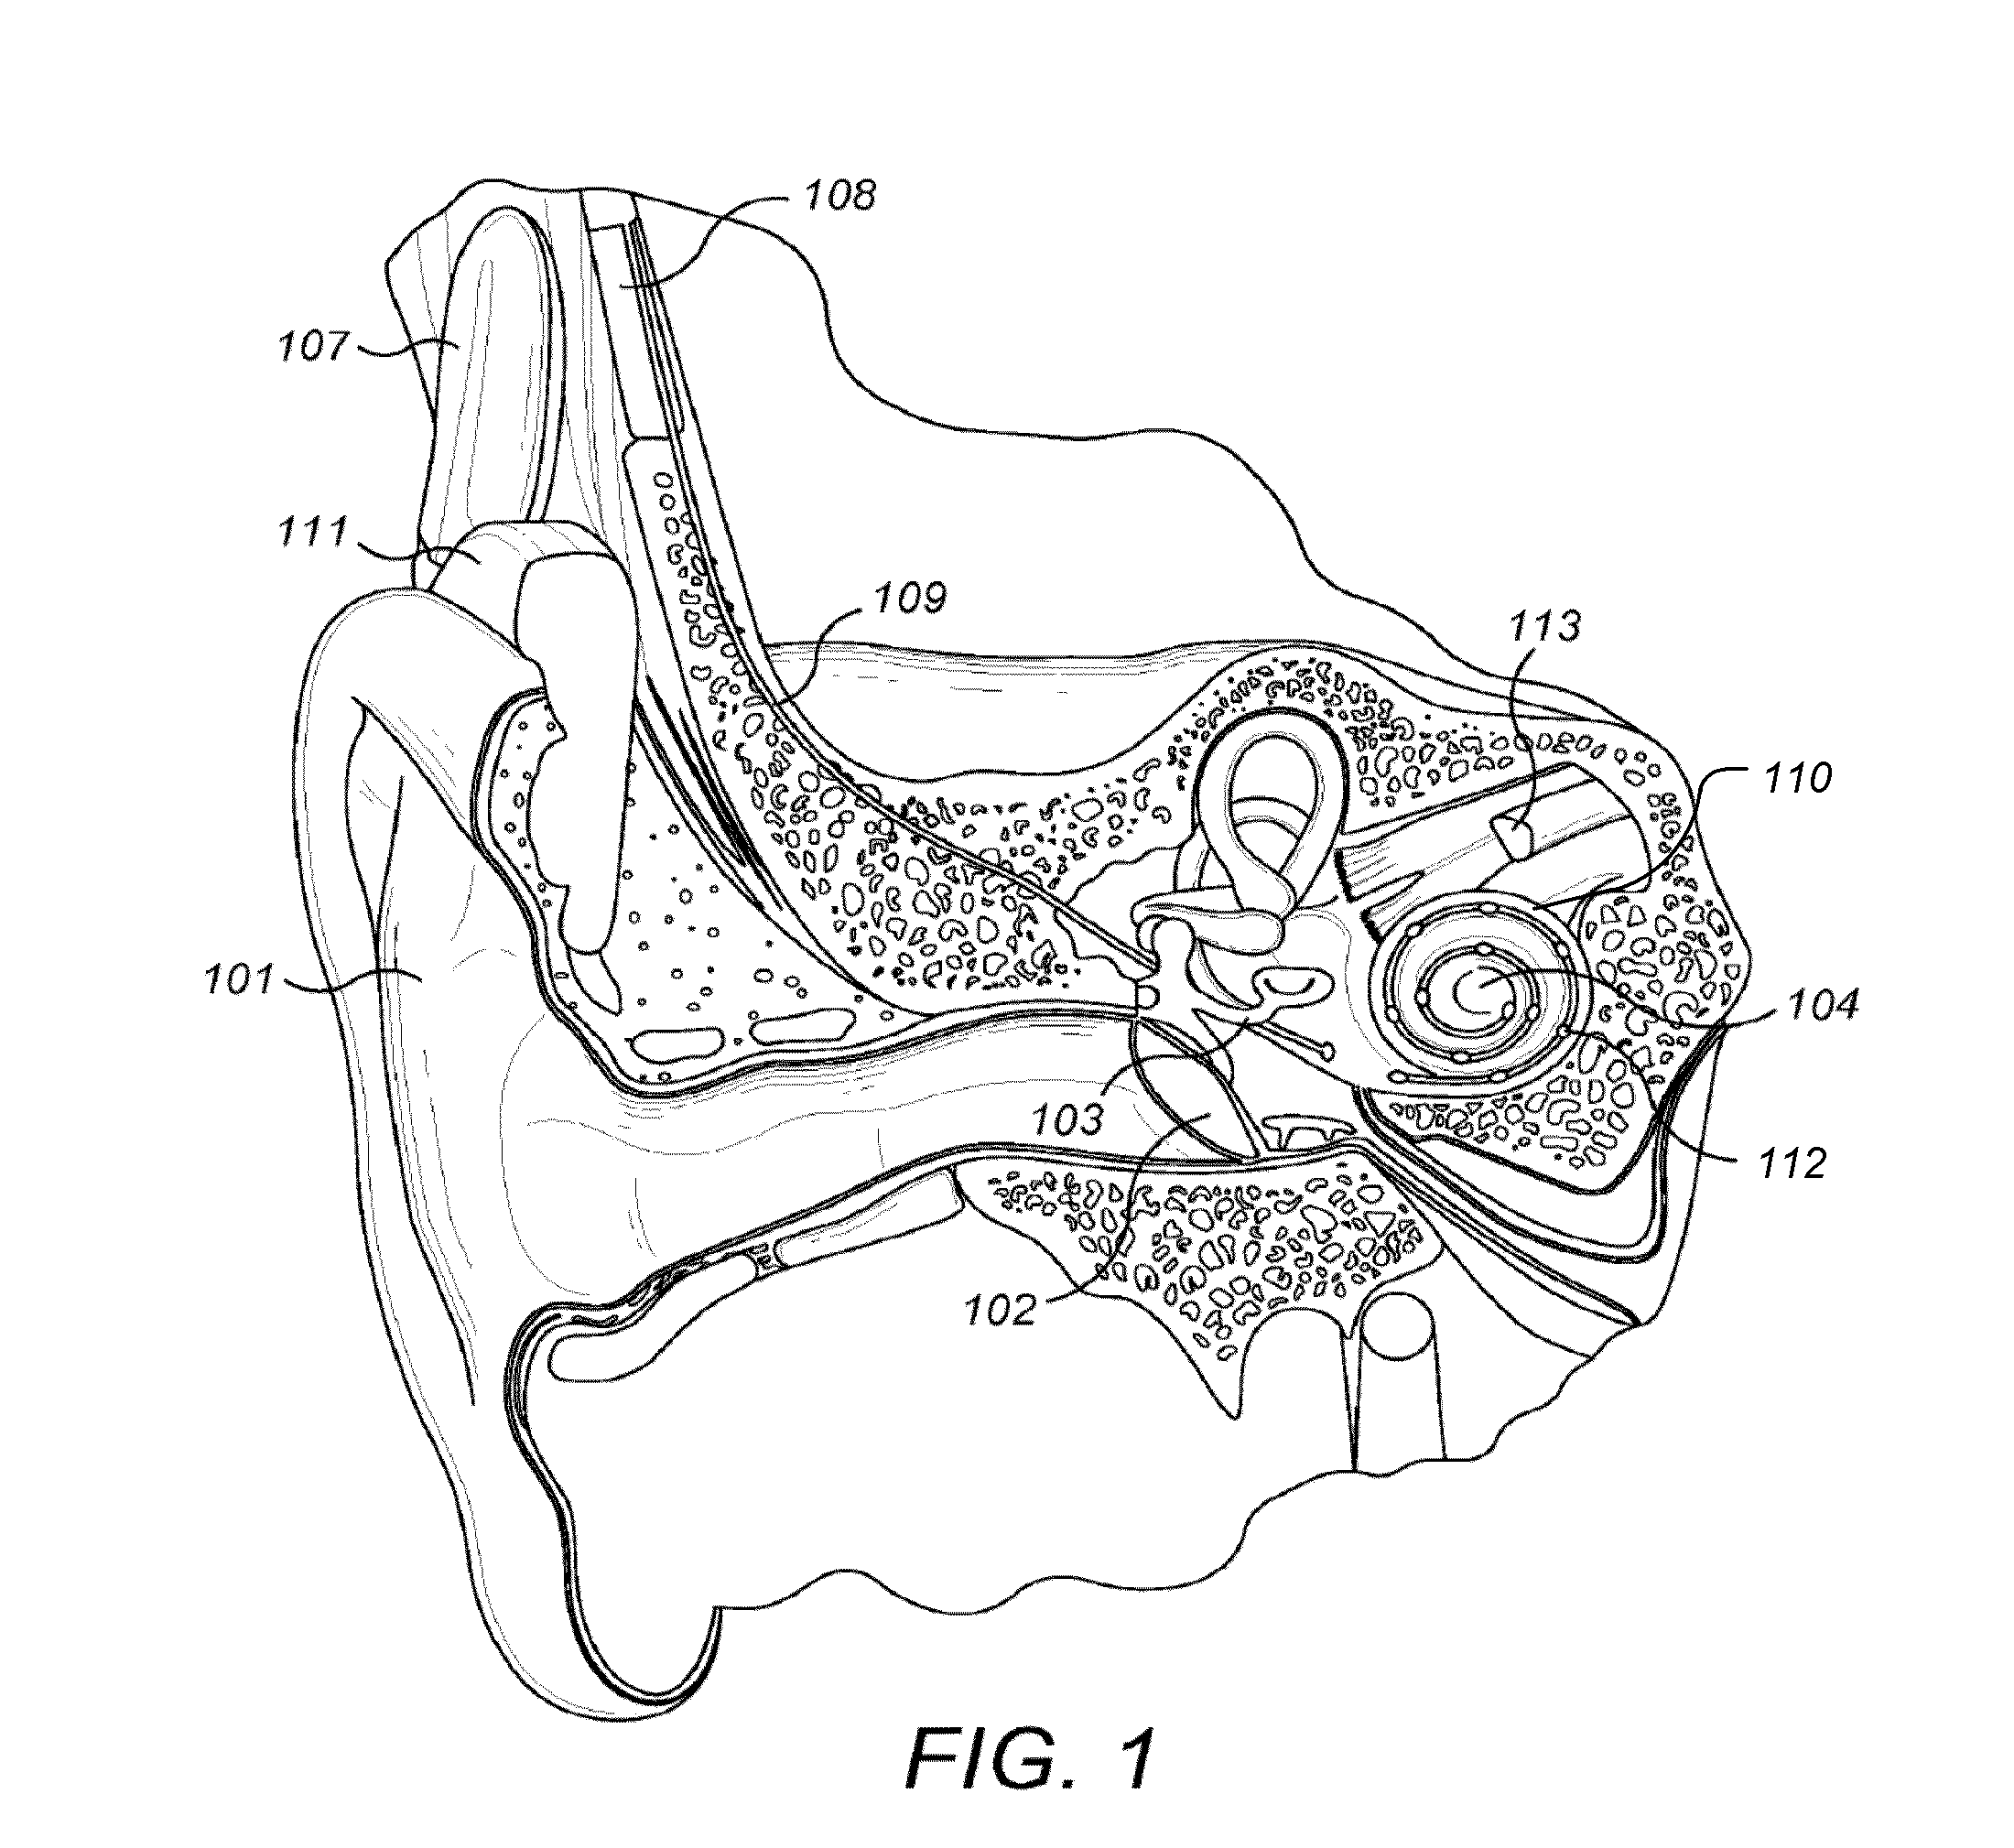 Cochlear Electrode With Apical Lateral Wall Section and Basal Modiolar Hugging Section